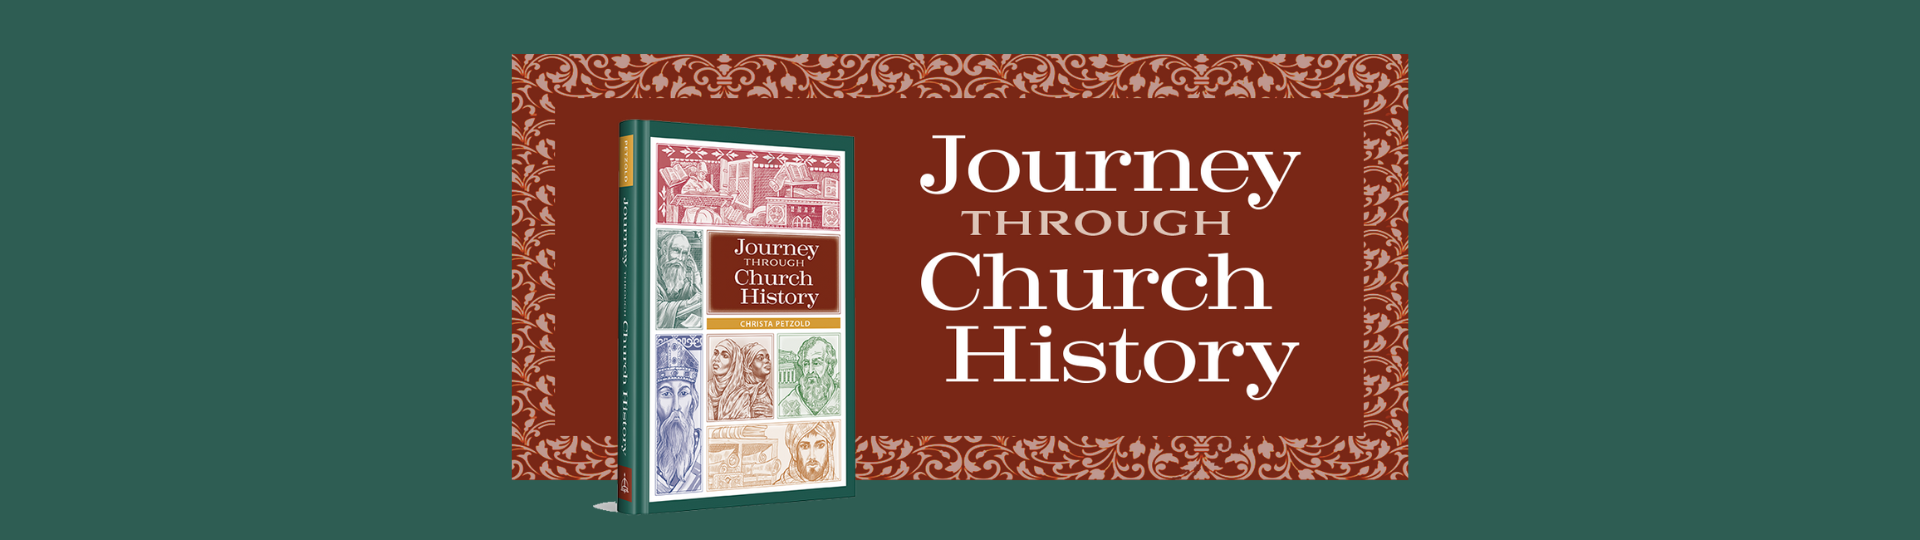 Press Release: Discover Monumental Figures and Events throughout the Church’s History